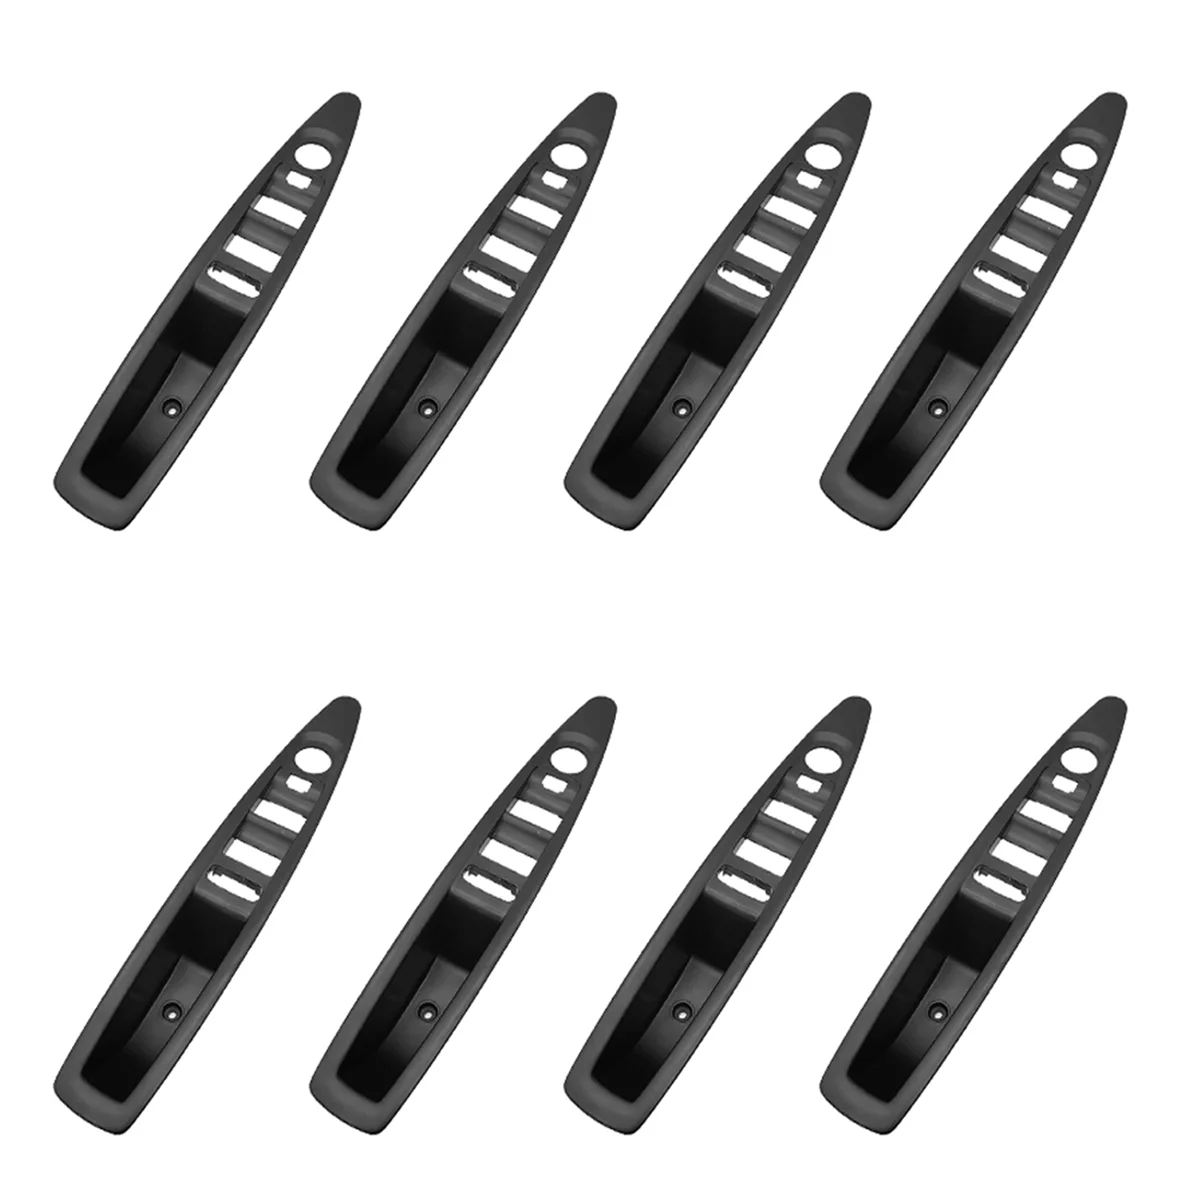 

8X 9332F2 Window Control Switch Panel Master Glass Lift Faceplate Rearview Mirror Button Frame for Citroen C4 2004-2010